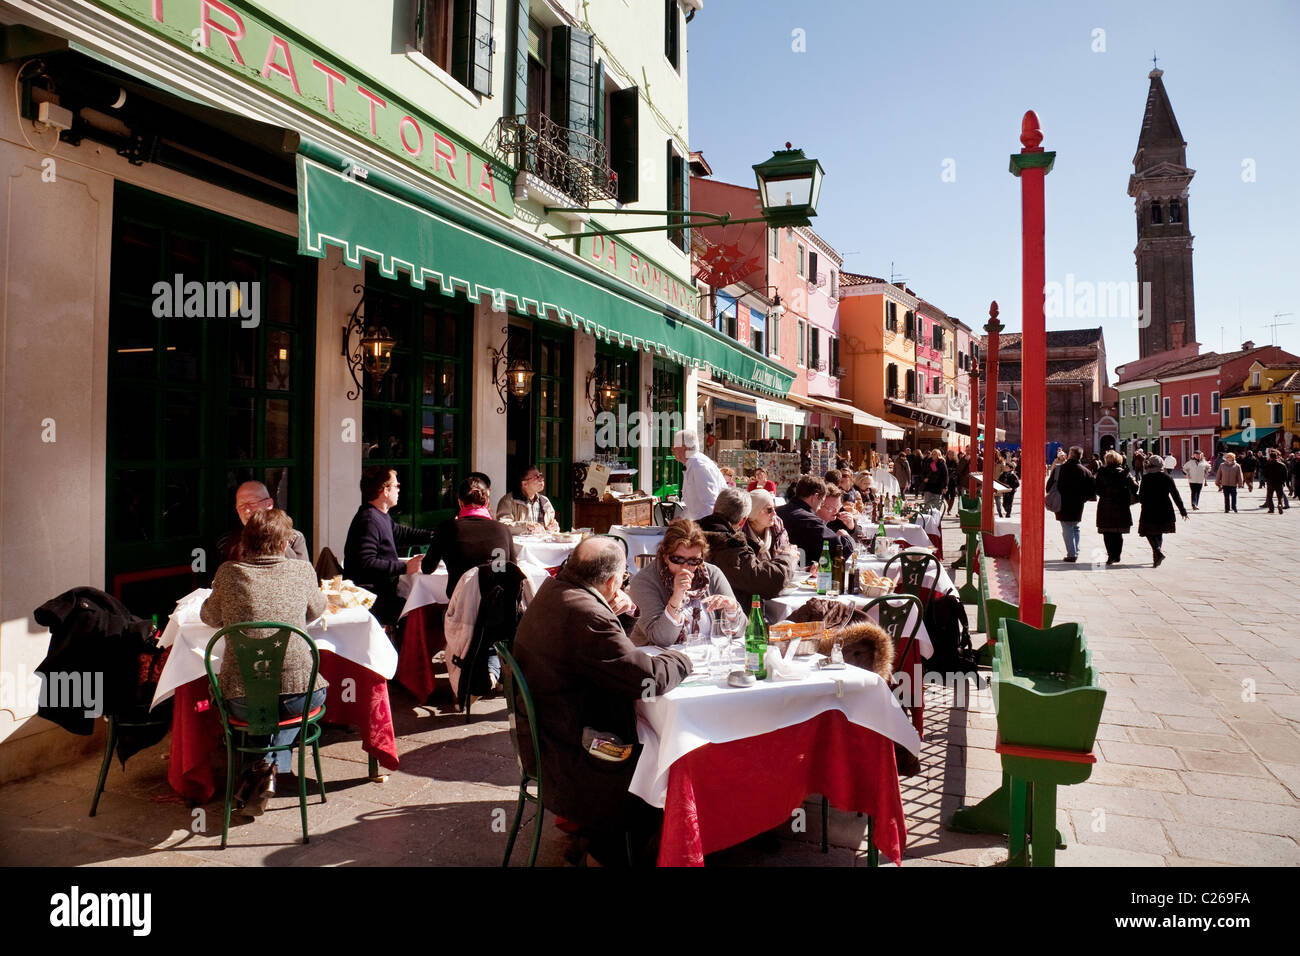 people eating and drinking at an outdoor restaurant, Burano village, Venice, Italy Stock Photo